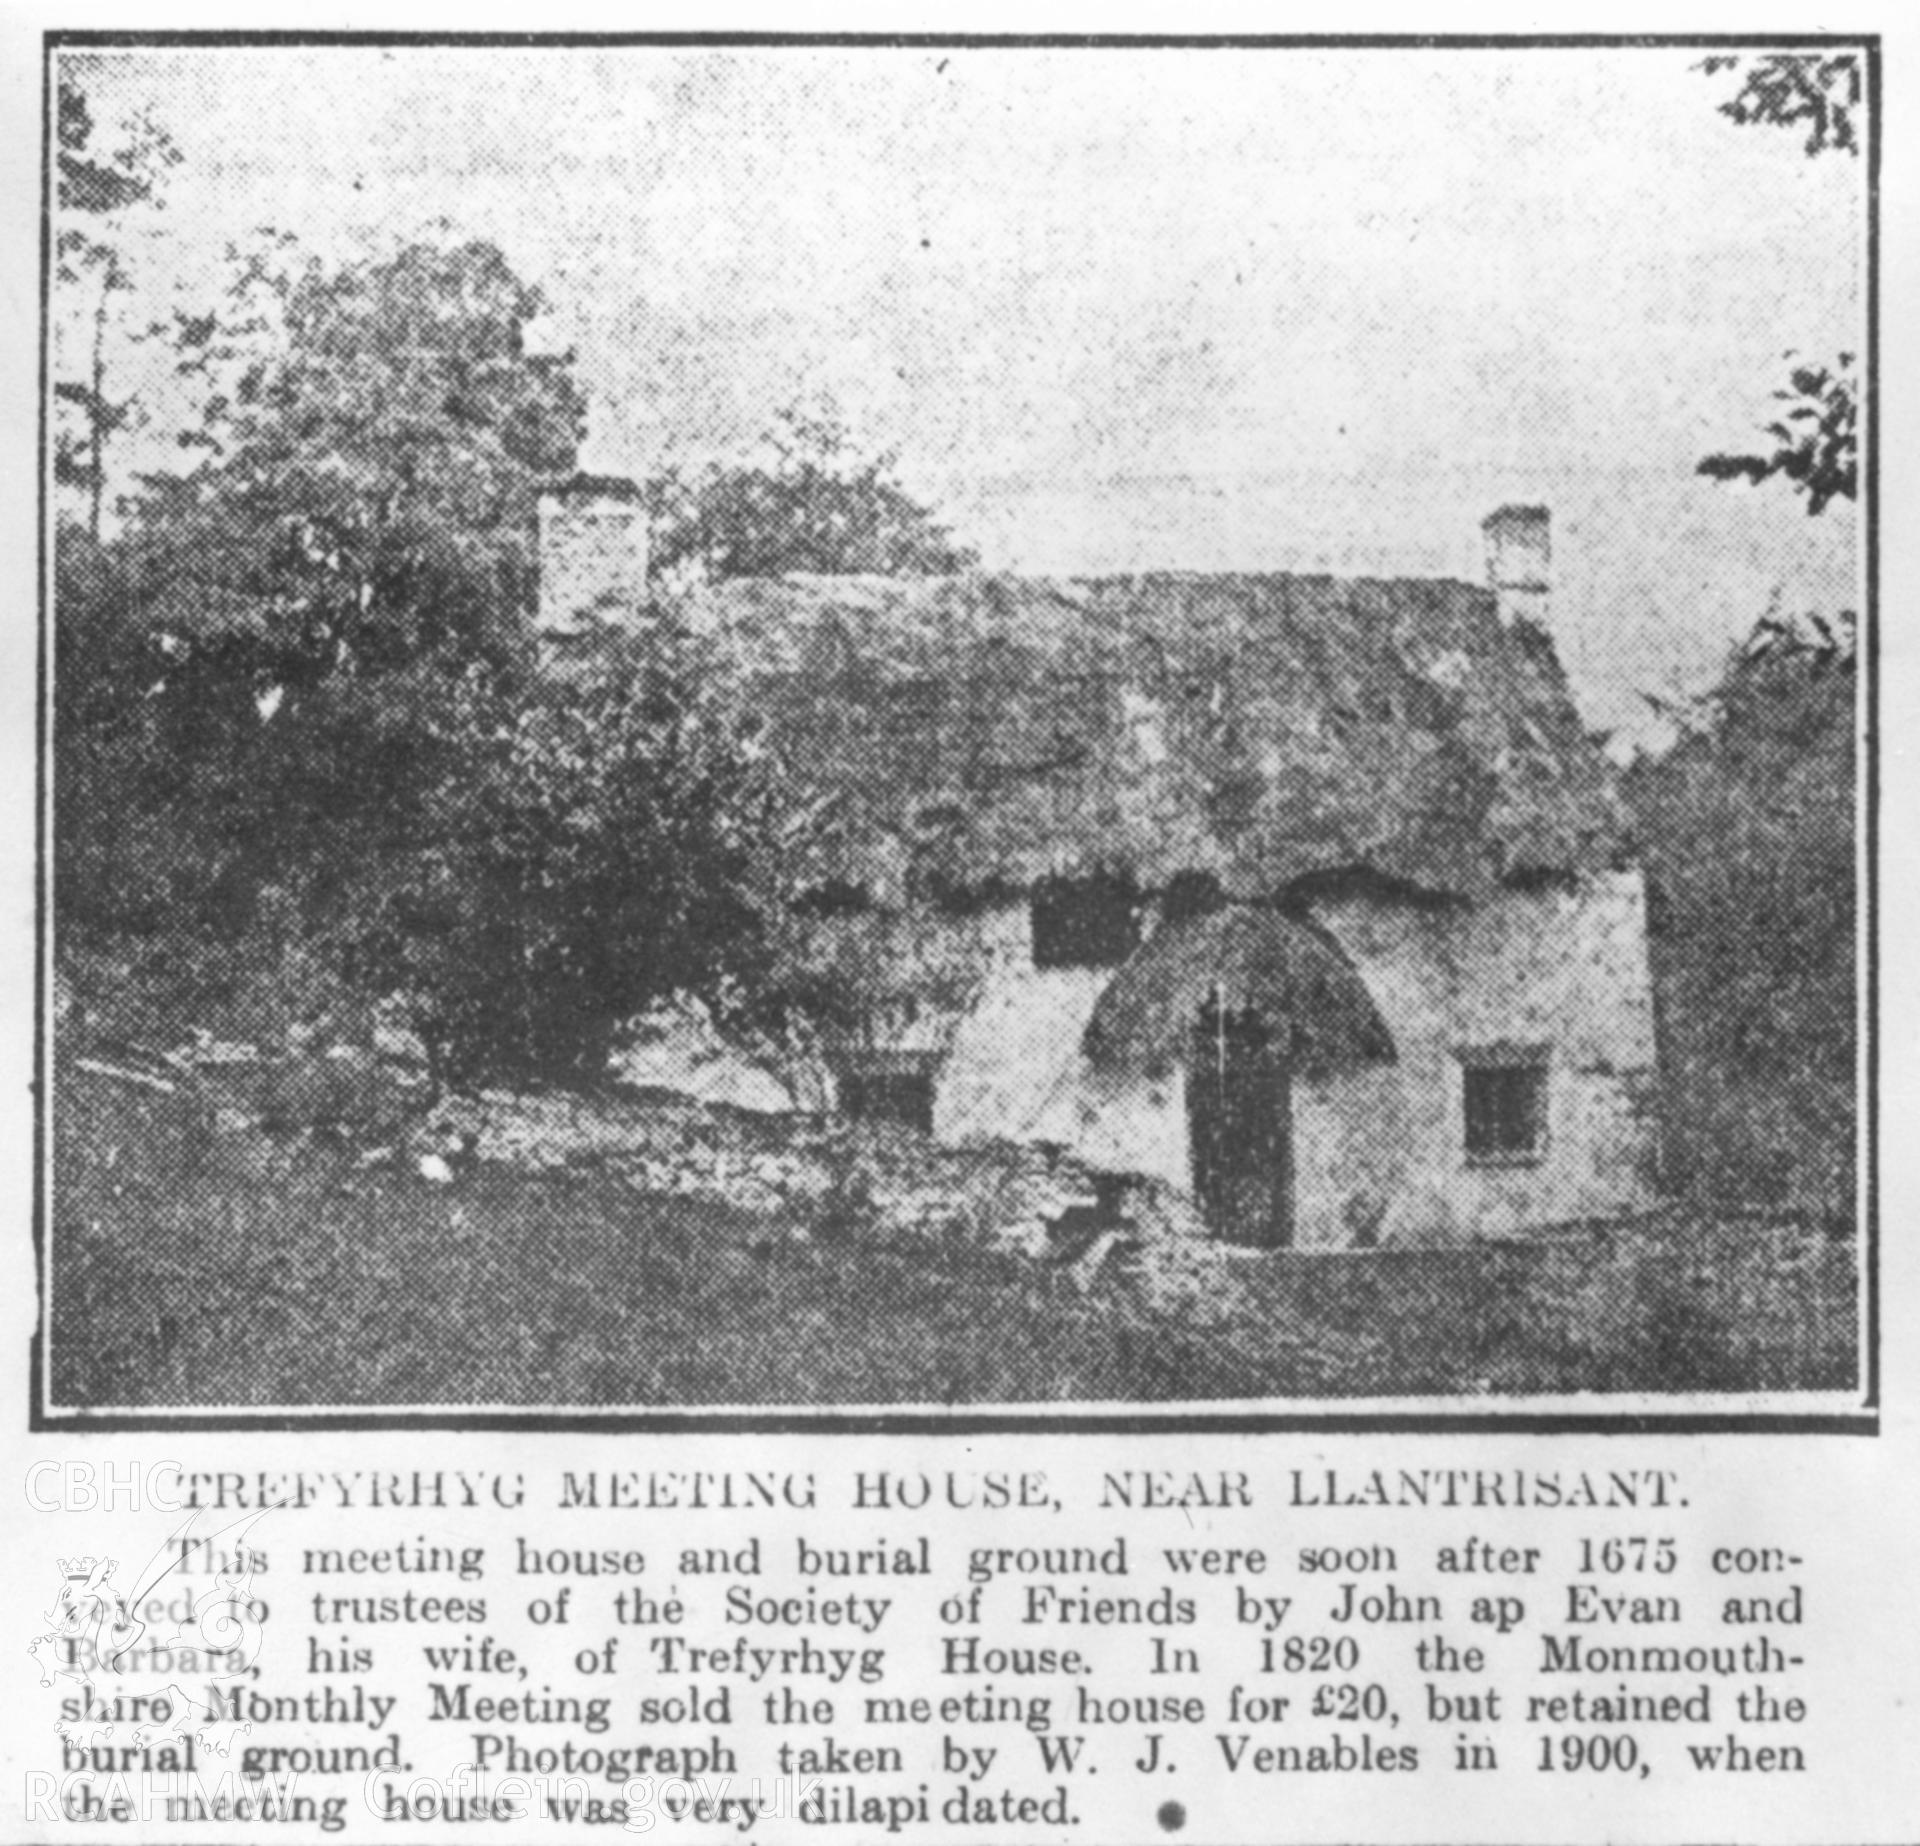 Black and white acetate negative showing a newspaper cutting relating to Trefyrhyg Meeting House.